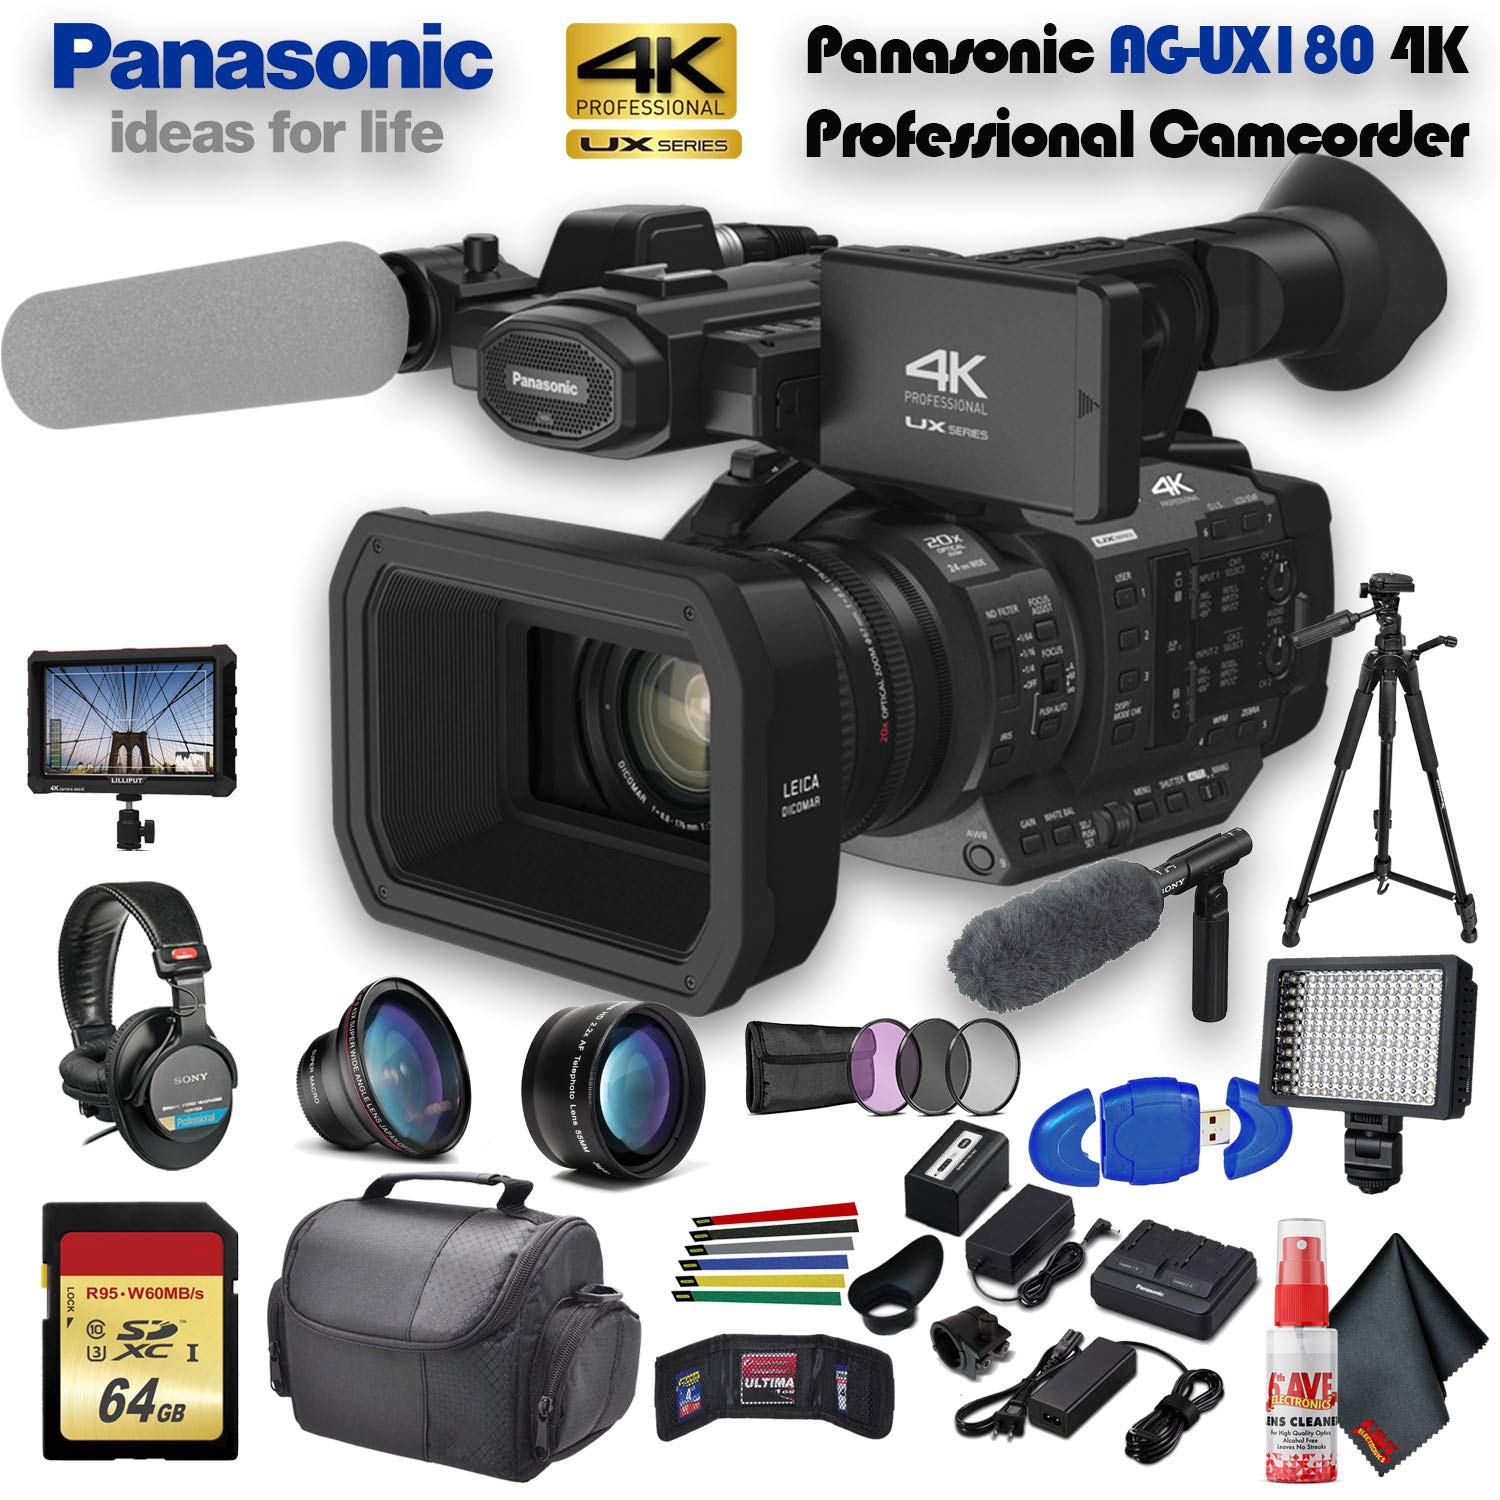 Panasonic AG-UX180 4K Professional Camcorder (AG-UX180PJ8) with Tripod, Padded Case, LED Light, 64GB Memory Card, Sony H